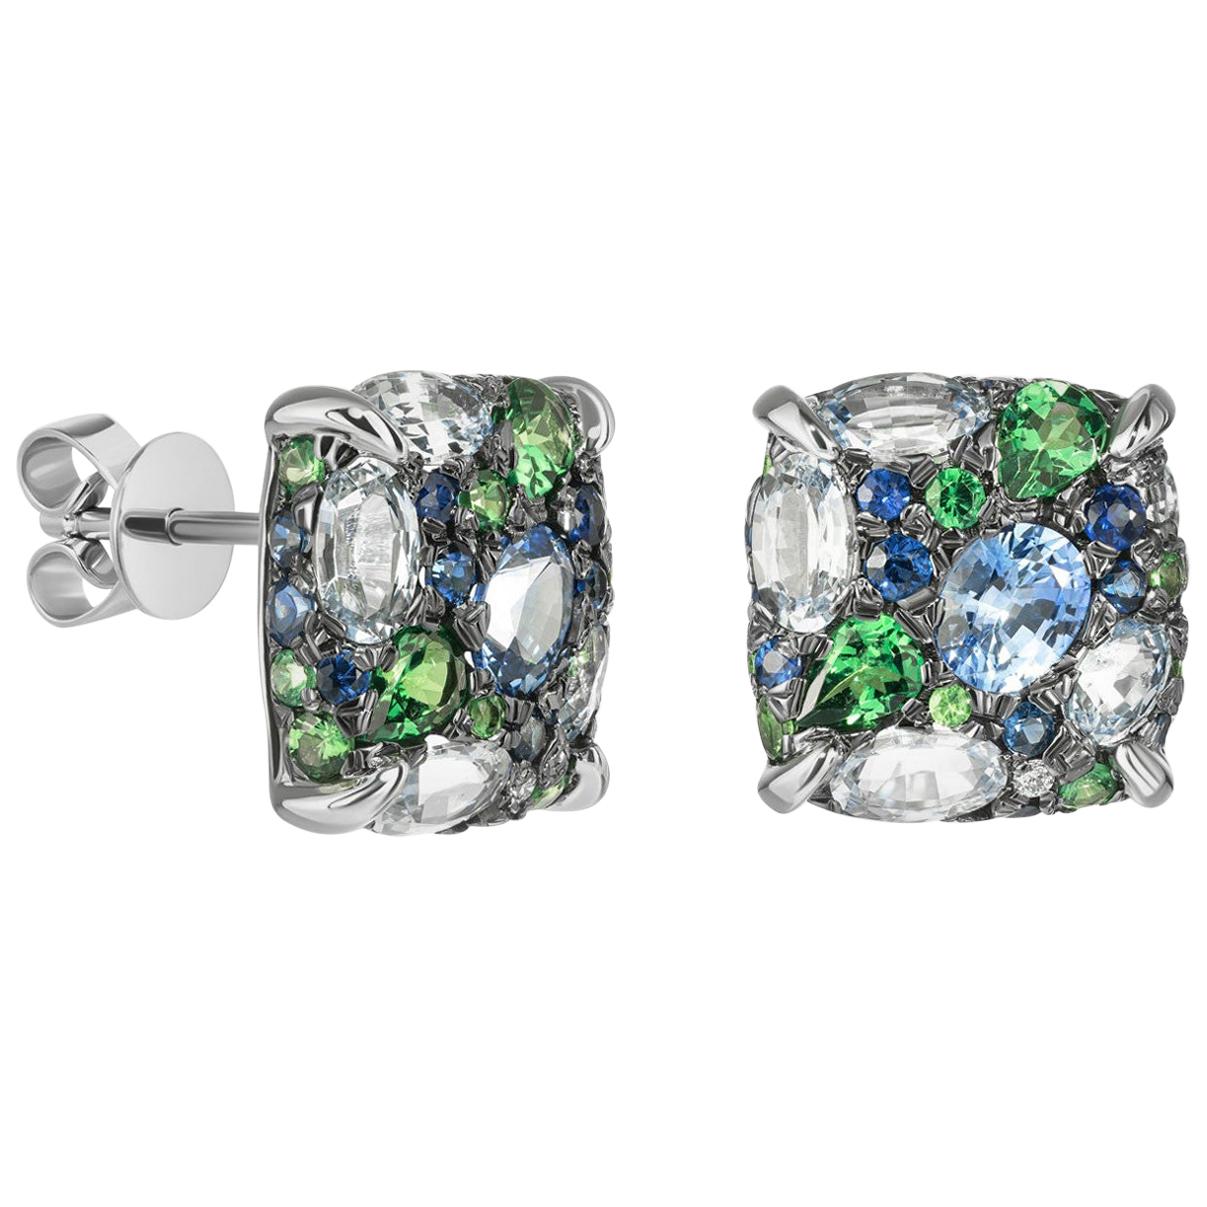 Earrings White Gold 14 K (Matching Ring Available)
Diamond 2-RND17-0,02-4/6A
Blue Sapphire 26-RND-0,11ct
Blue Sapphire 2-Oval-0,74ct
Blue Sapphire 8-Oval-2,95ct
Blue Sapphire 2-RND-0,16ct
Tsavorite 22-Oval-1,02ct

Weight 6.23 grams


With a heritage